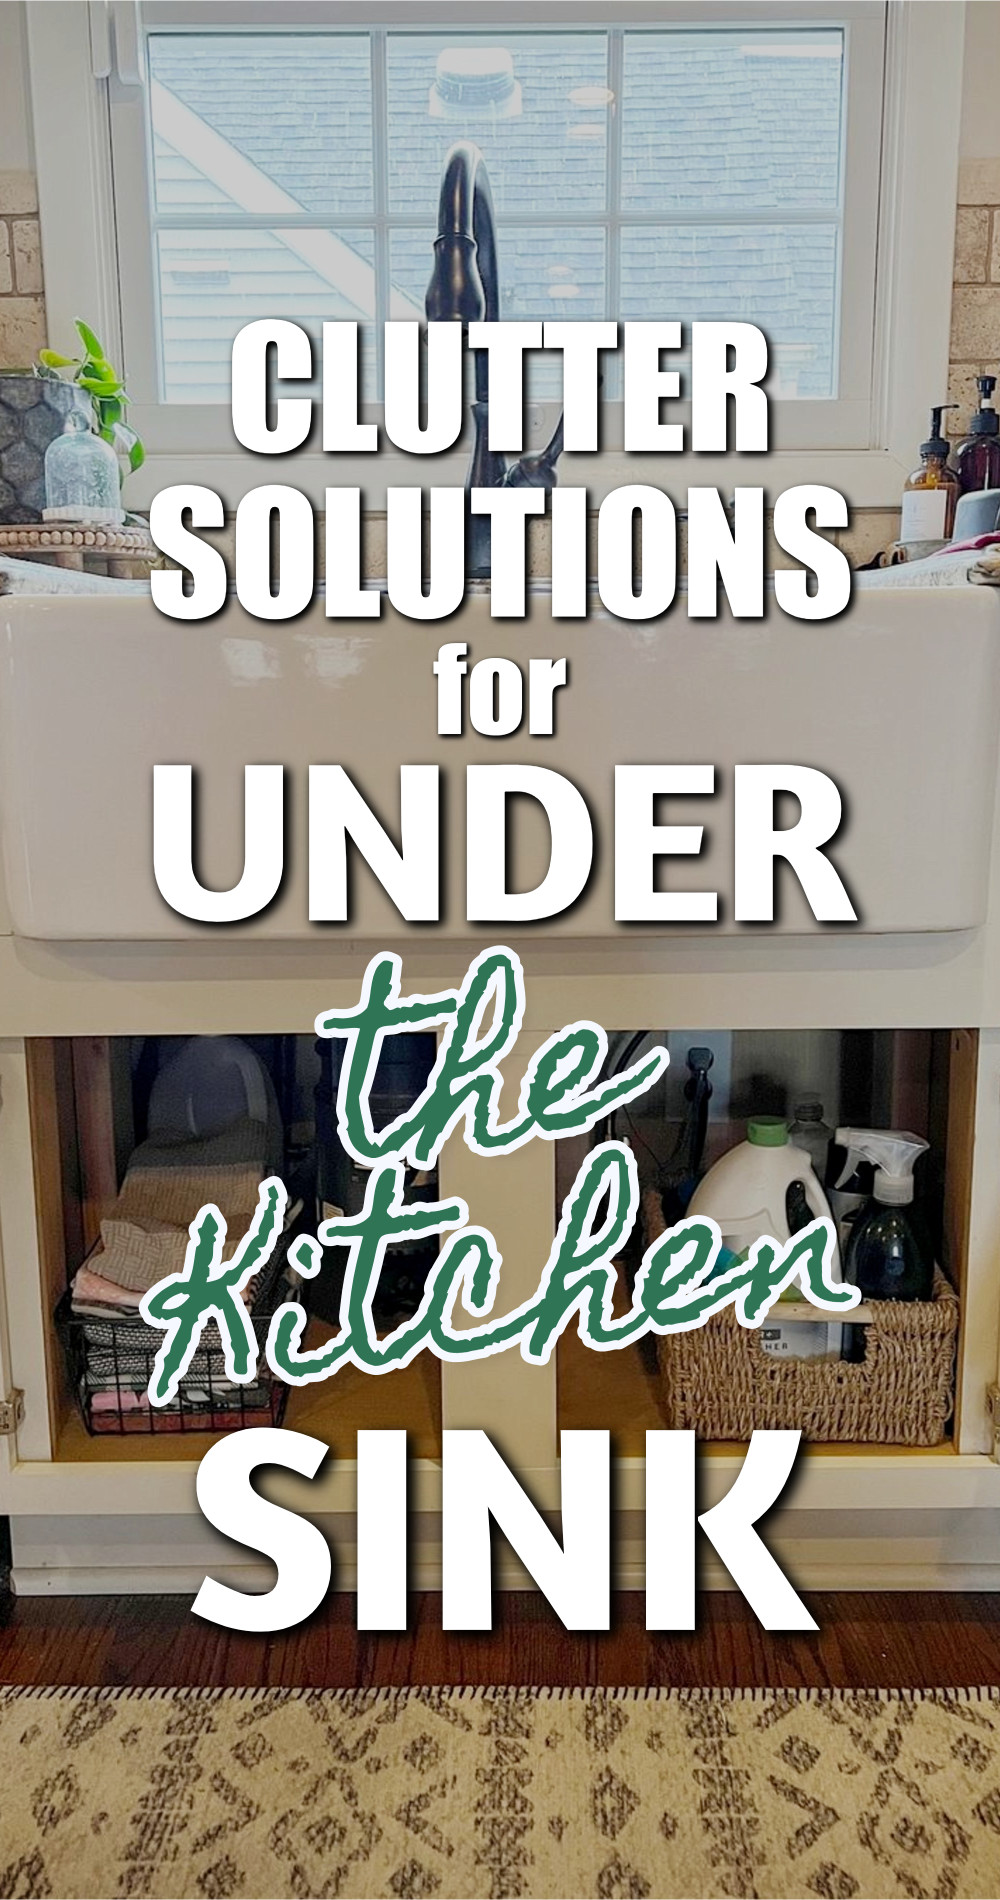 Clutter Solutions For Under The Kitchen Sink Cabinet Storage and Organization Ideas For The Home